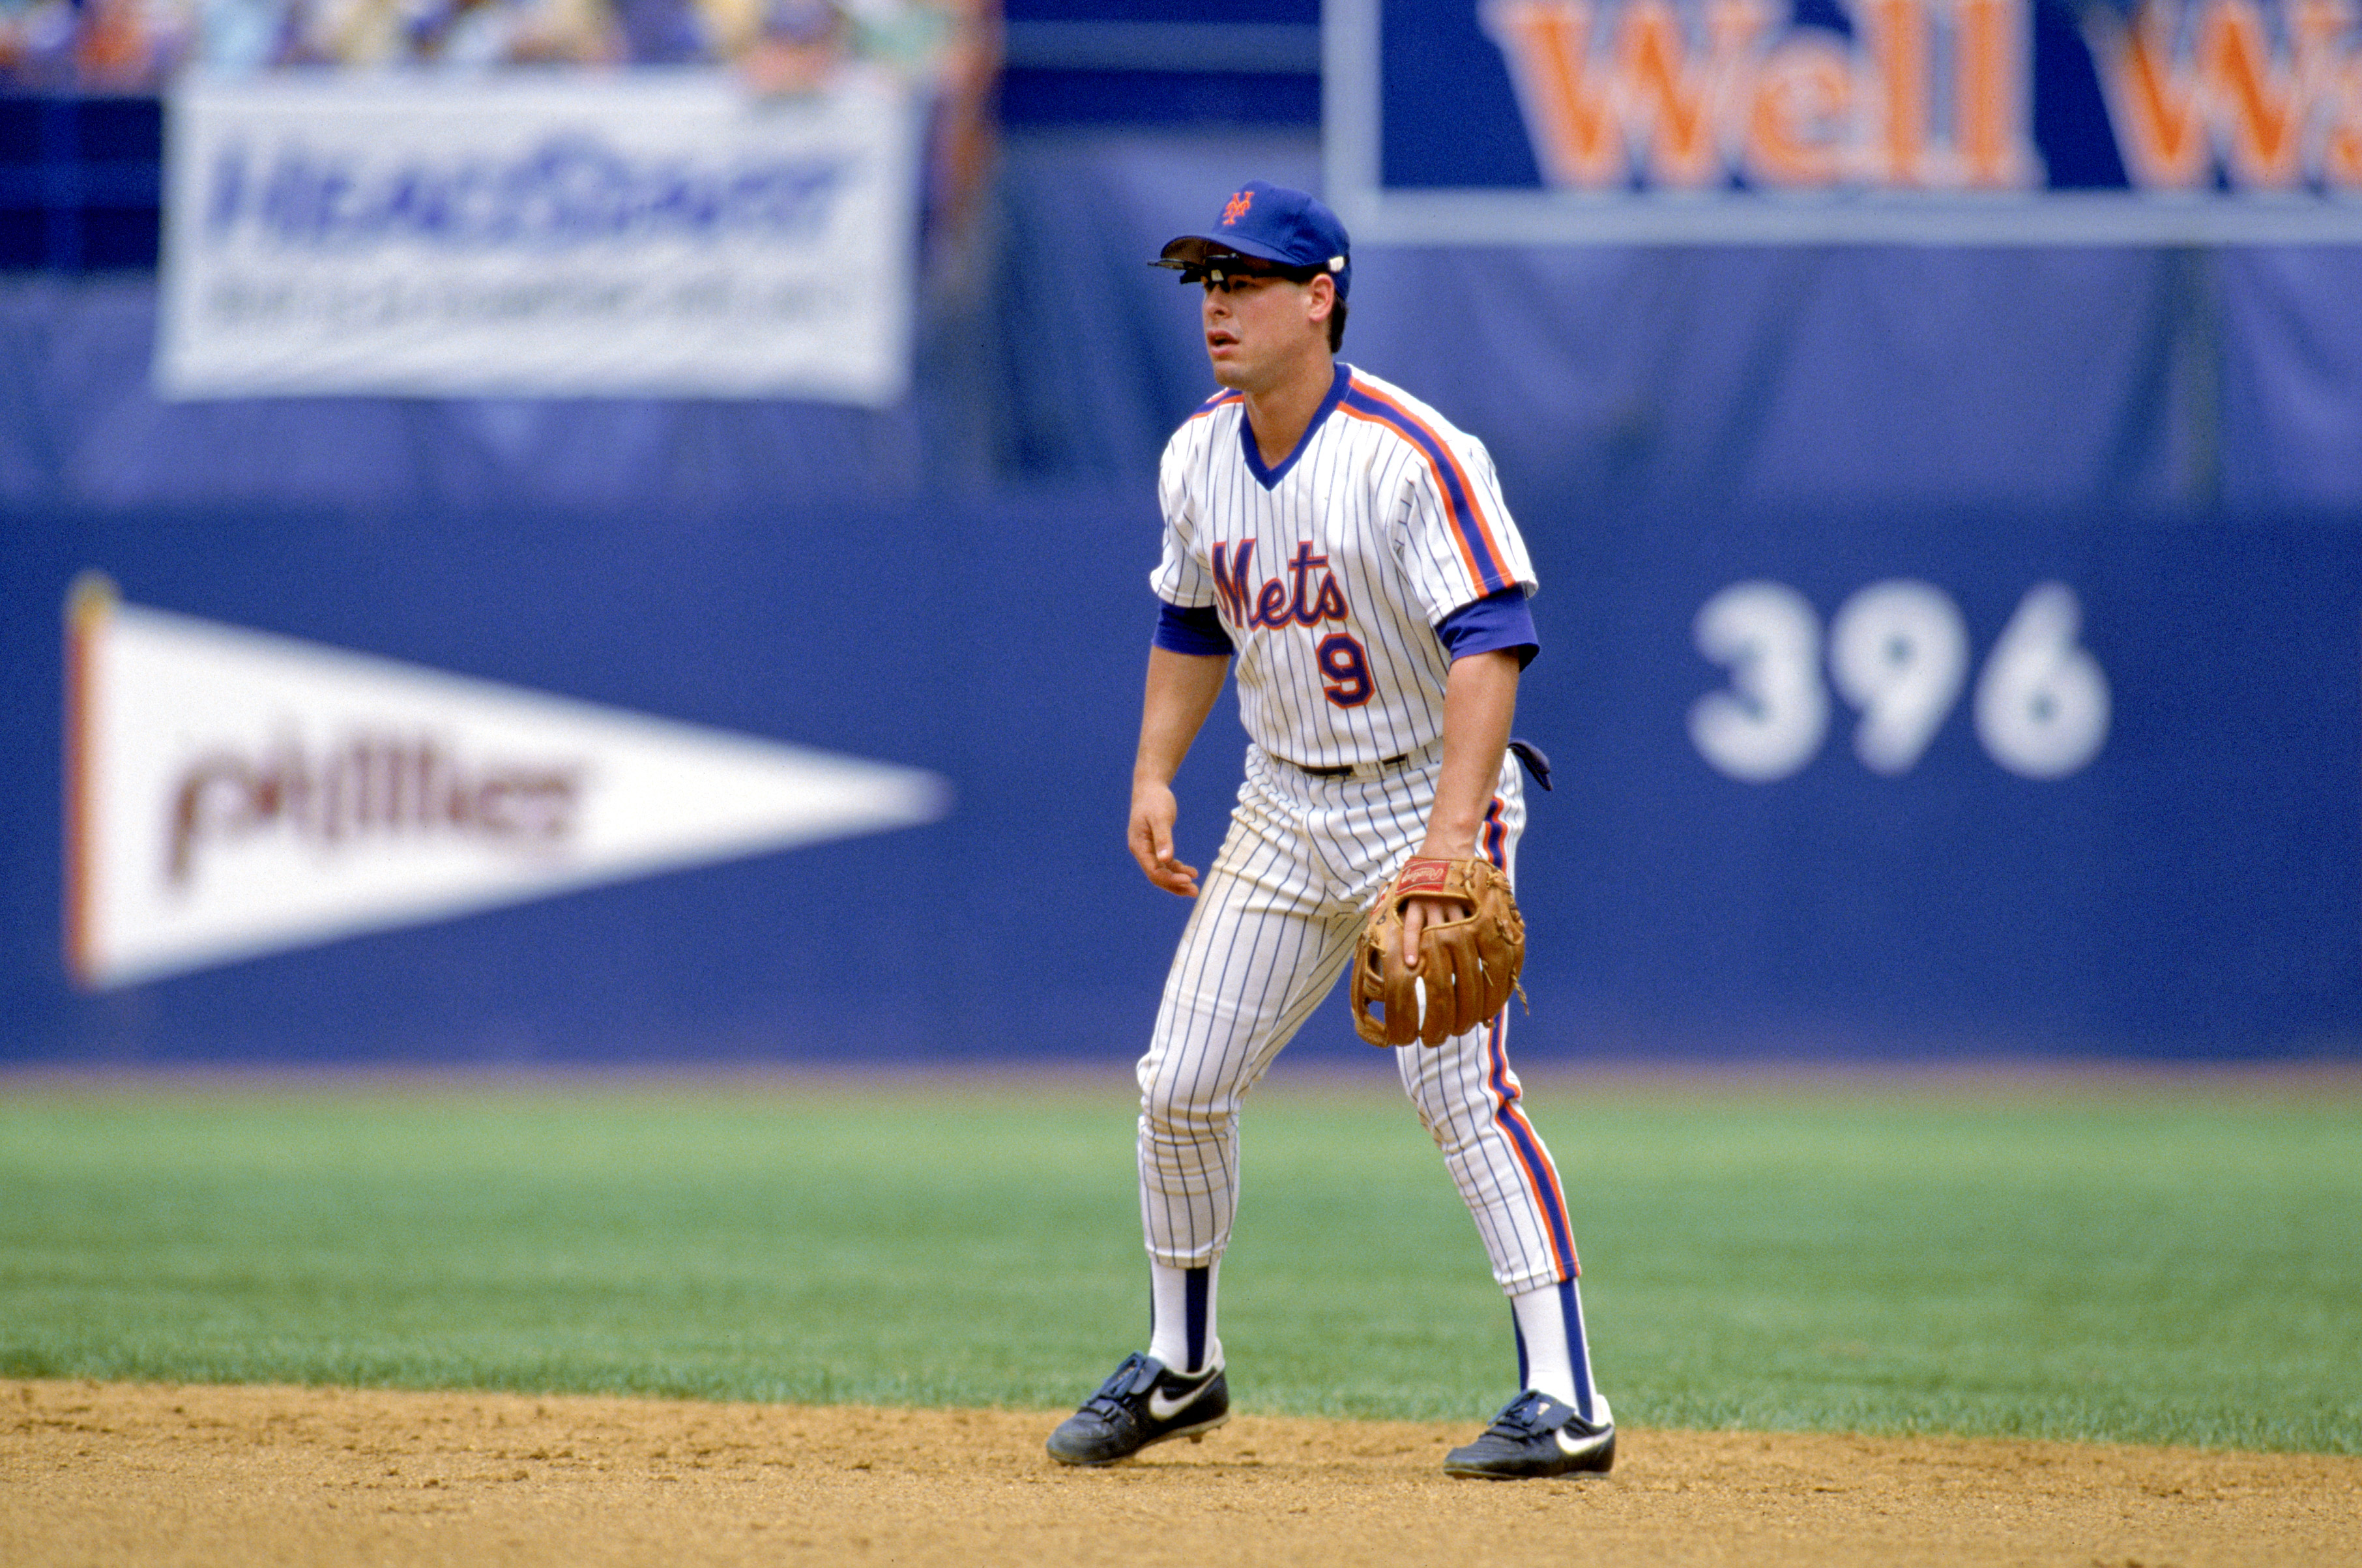 1989:  Gregg Jefferies of the New York Mets gets ready to field the ball during a game in the 1989 season. ( Photo by: Rick Stewart/Getty Images)